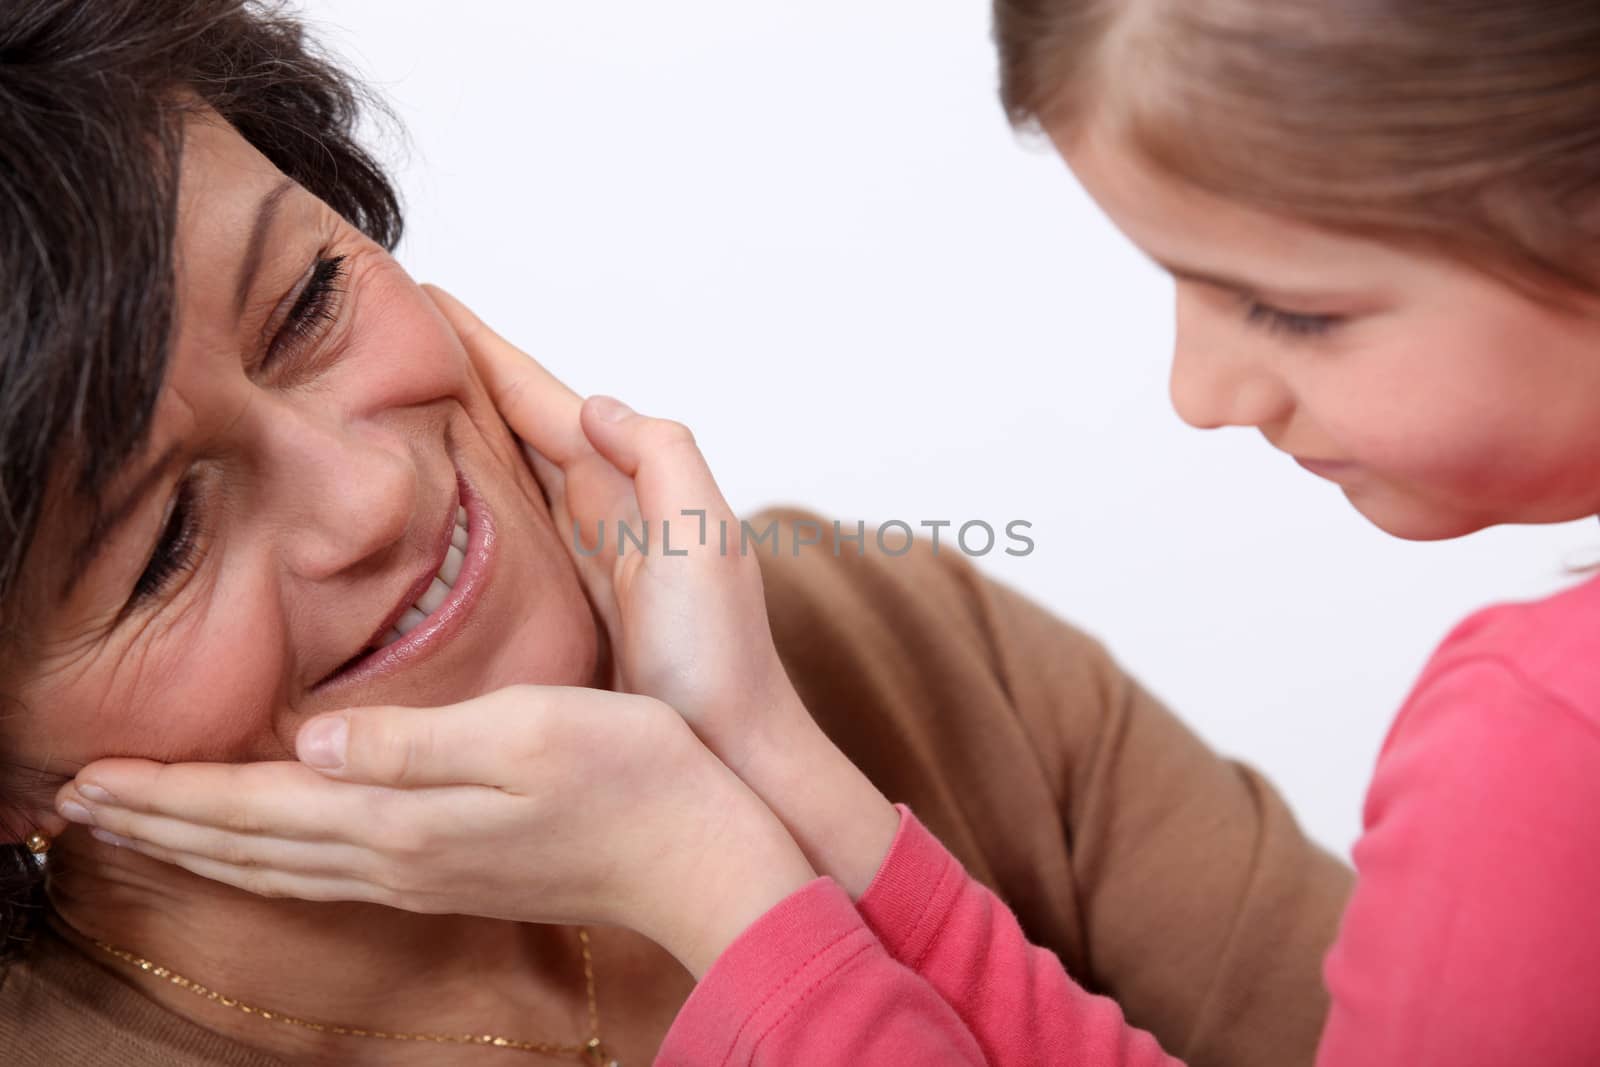 Daughter touching mother's face by phovoir